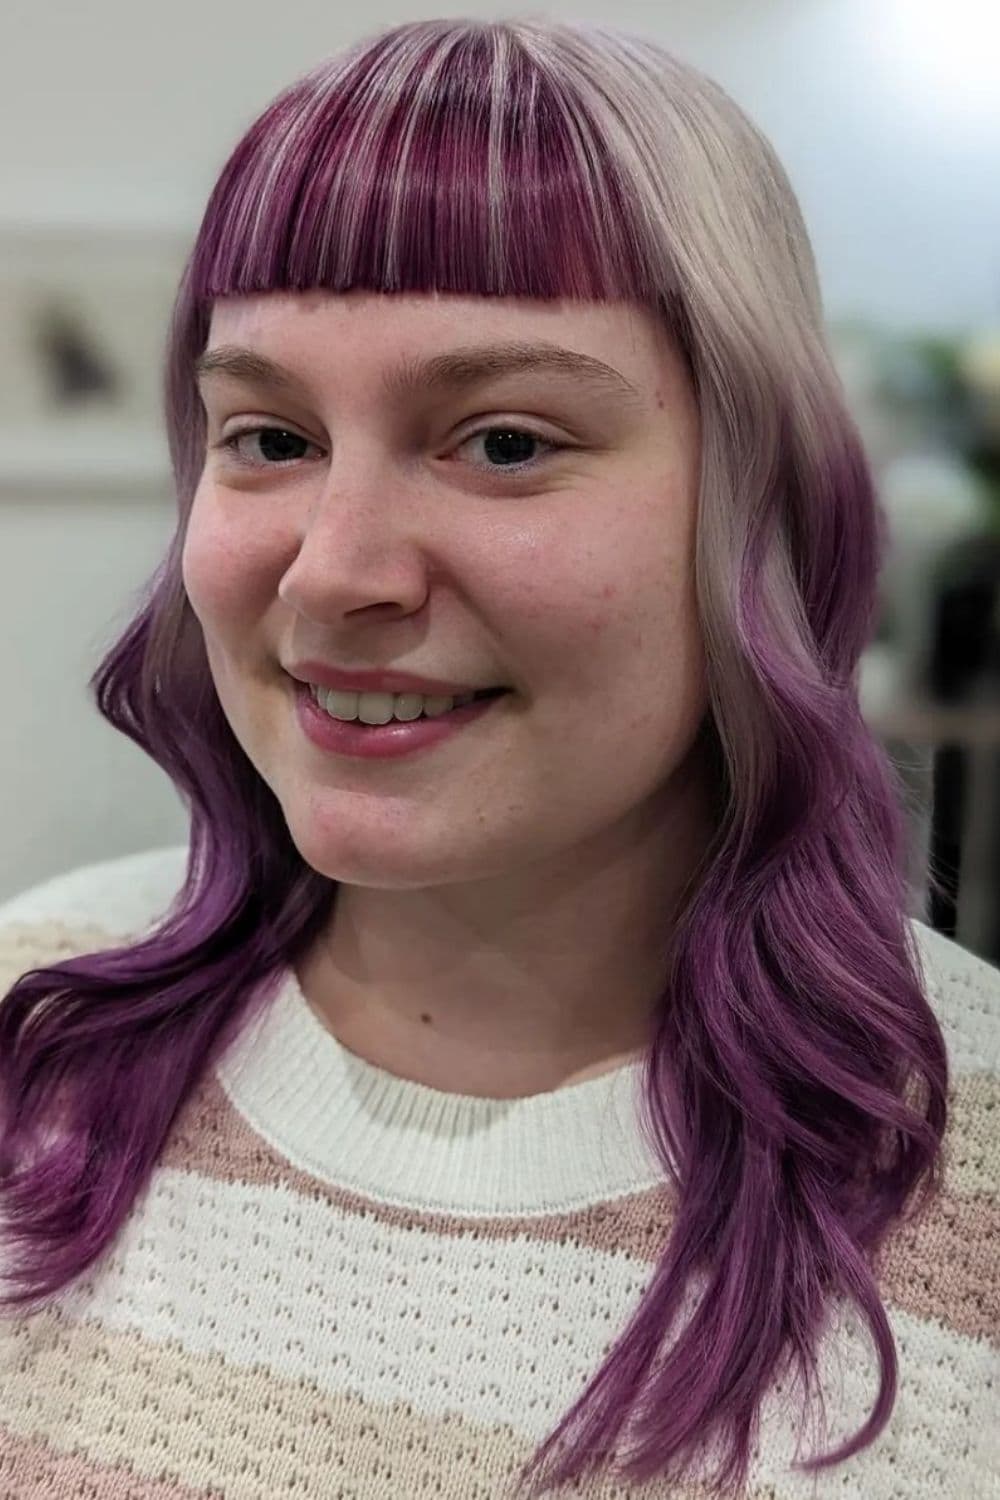 A woman with purple and blonde medium-length hair with baby bangs.